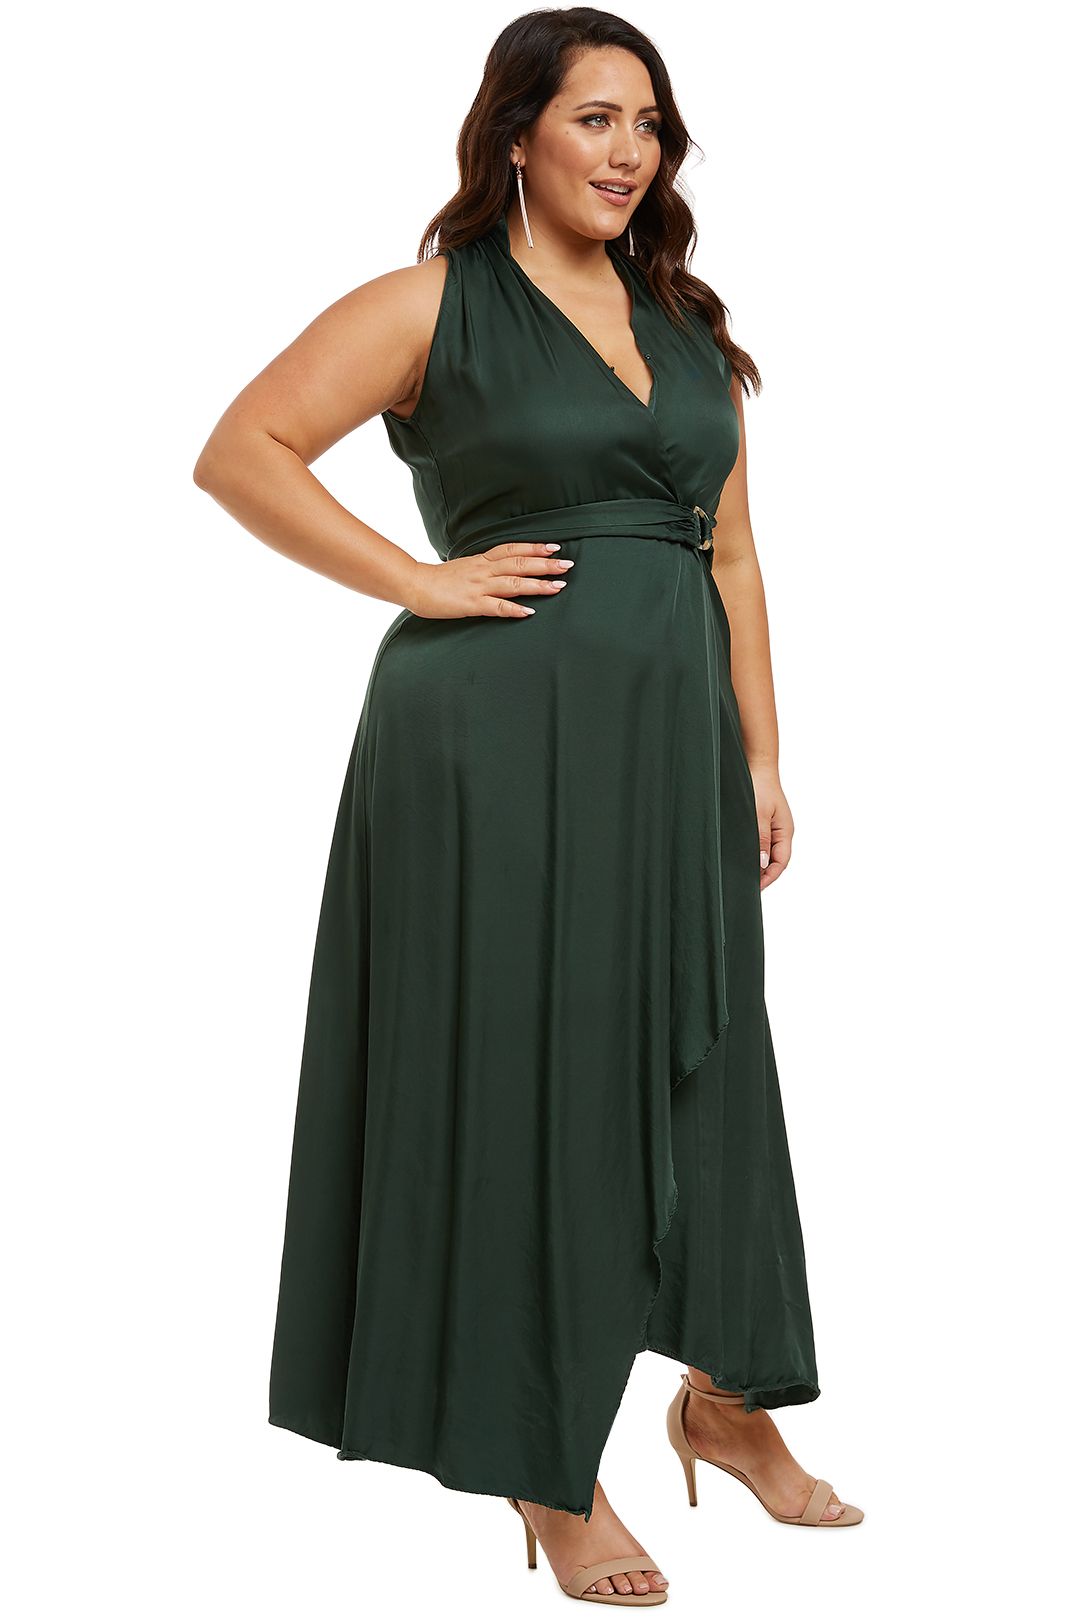 Sonorous Wrap Dress in Forest by Ginger and Smart for Hire | GlamCorner